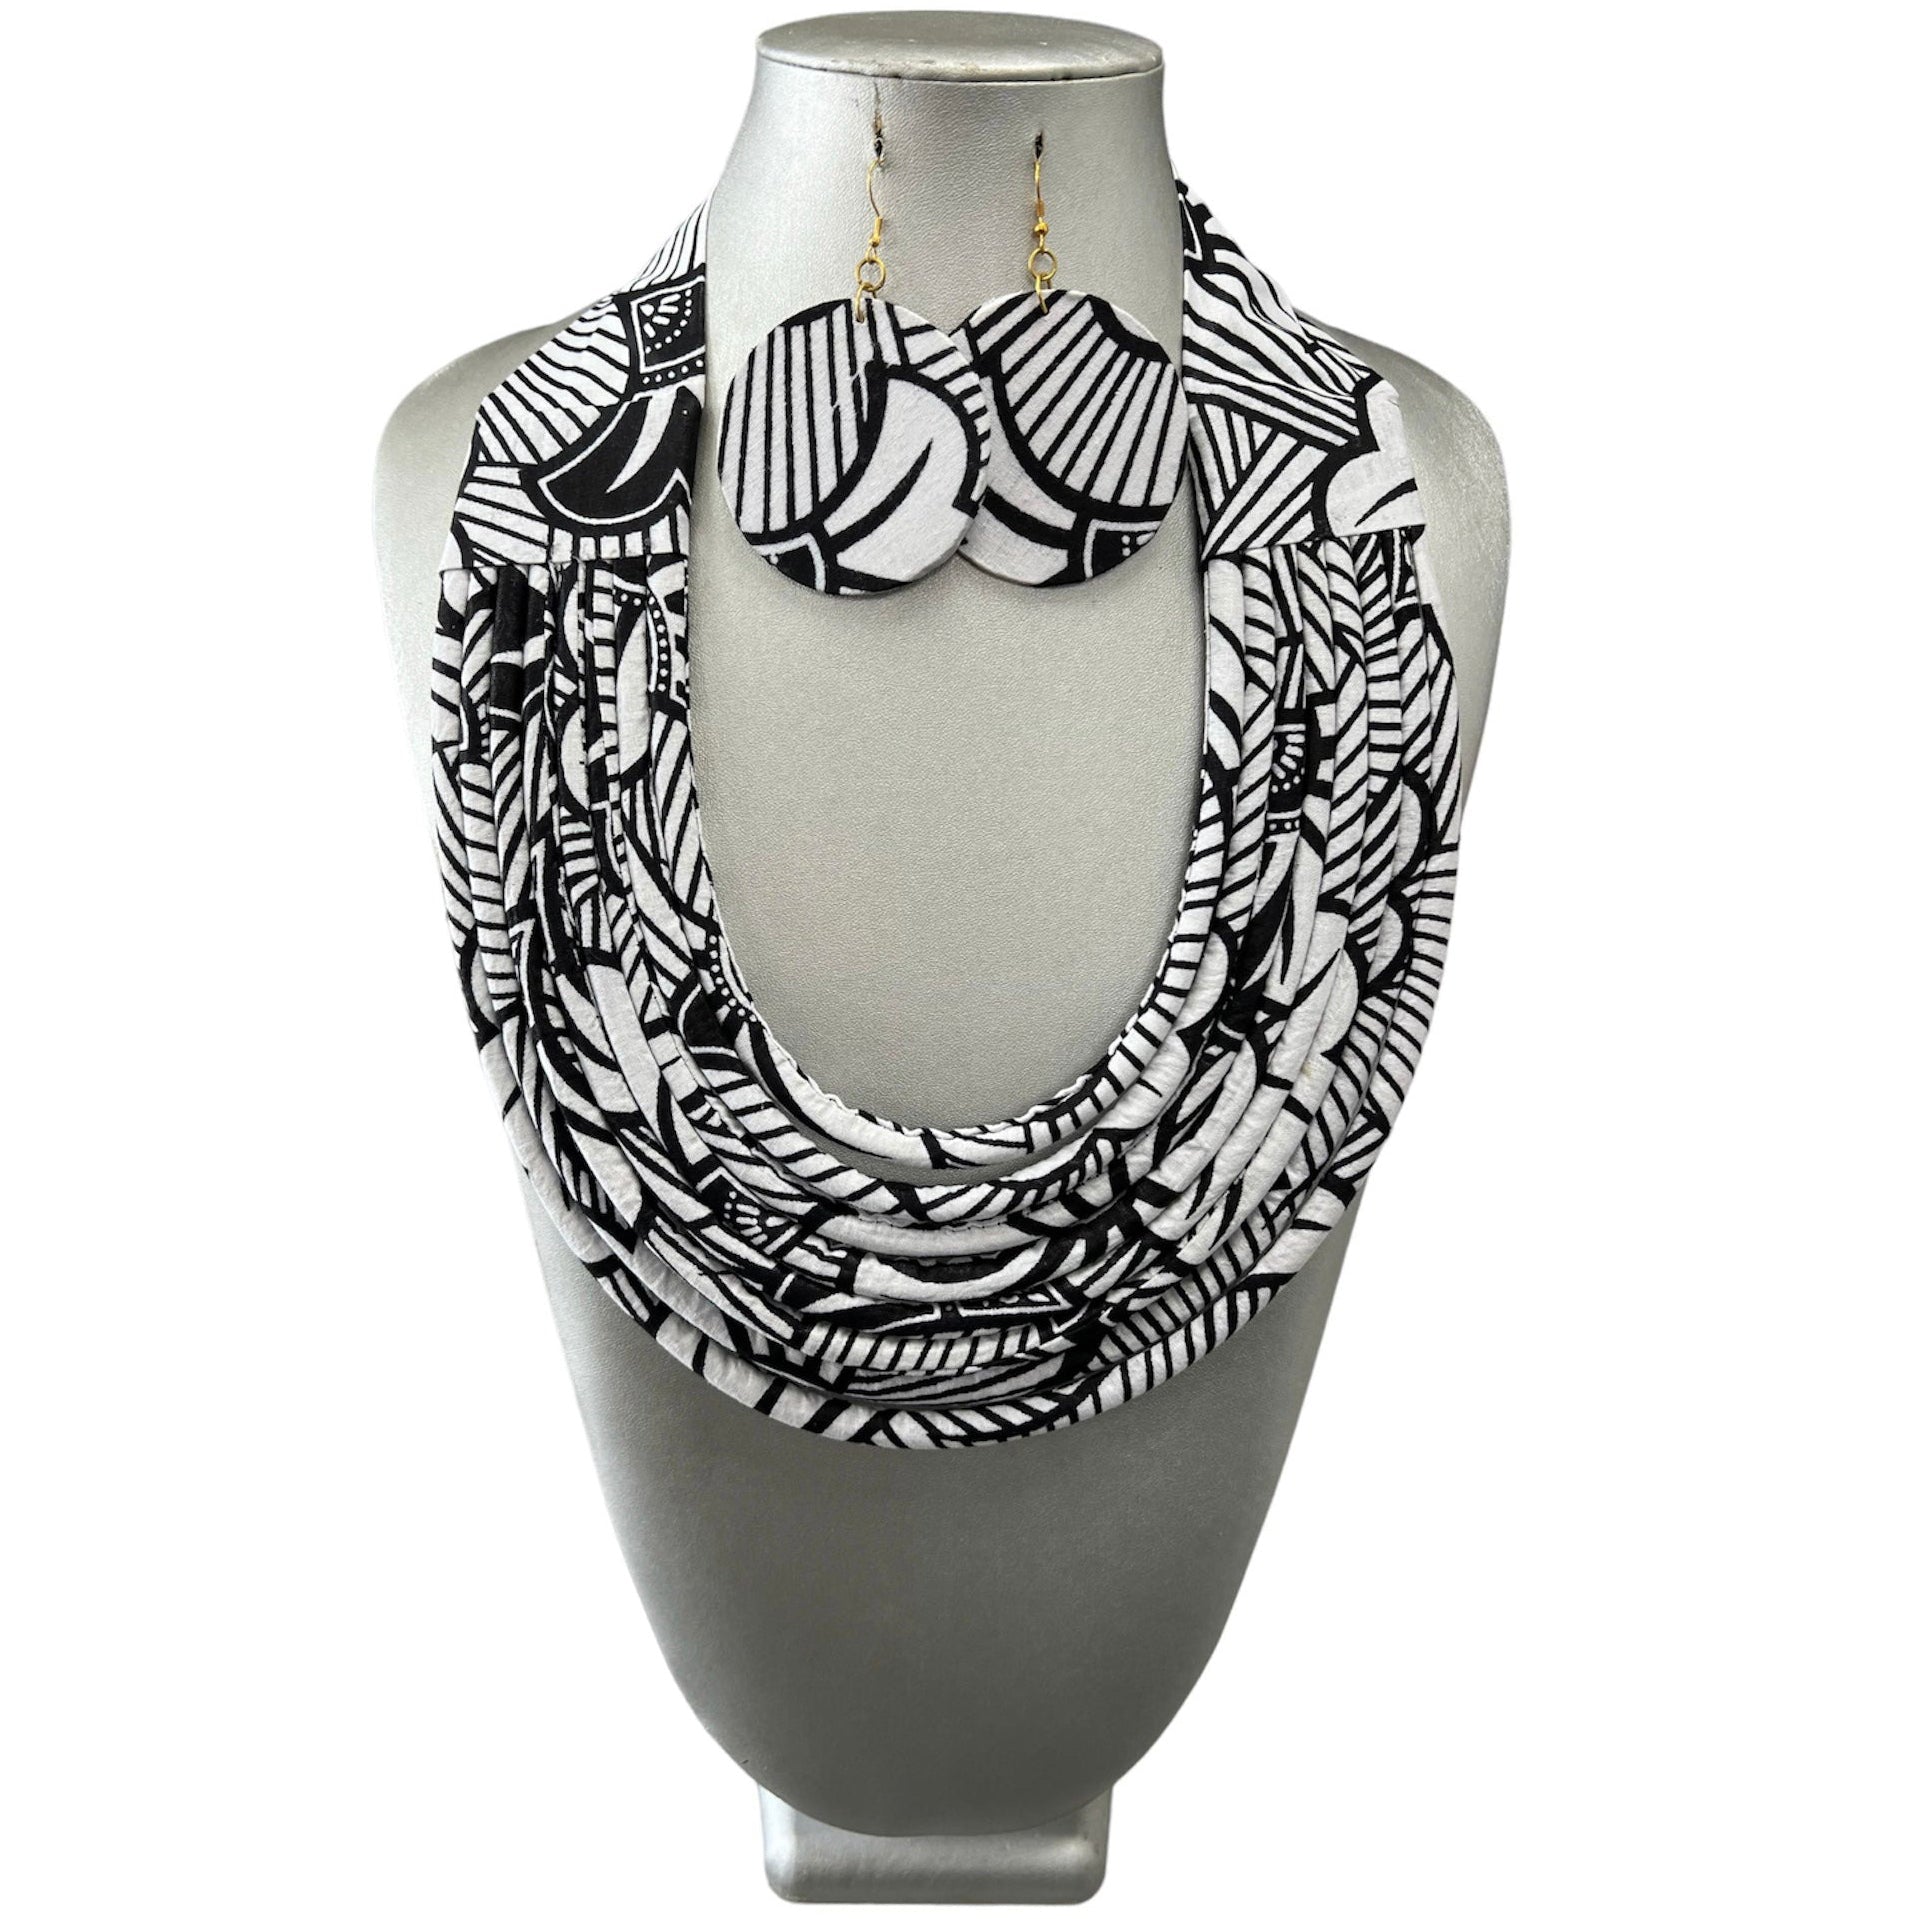 Women's African Printed Single Layer Fabric Necklace Set with Round Earrings